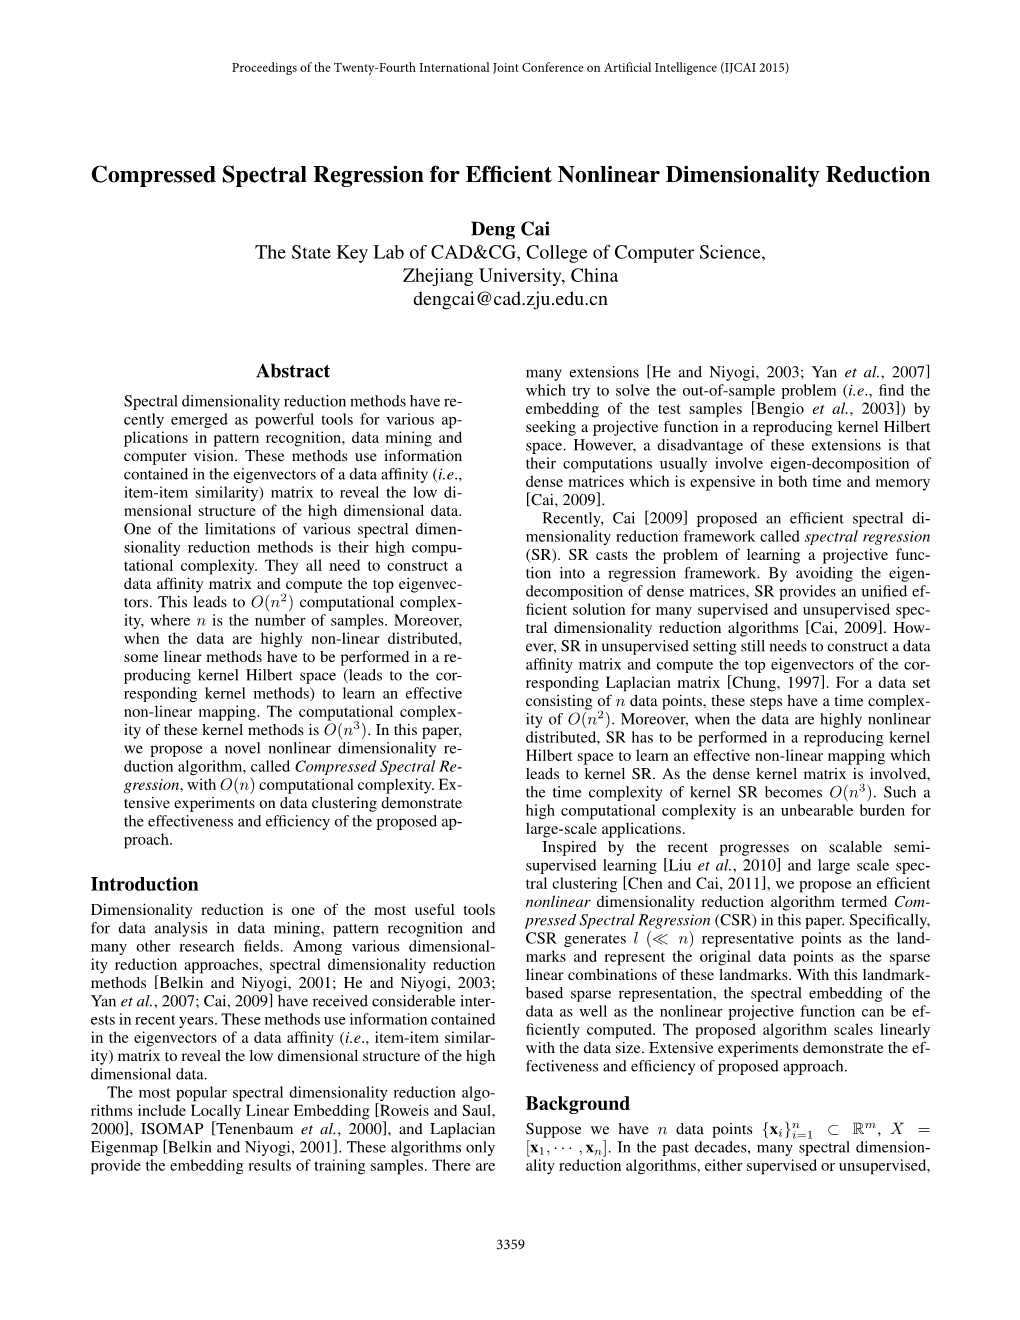 Compressed Spectral Regression for Efficient Nonlinear Dimensionality